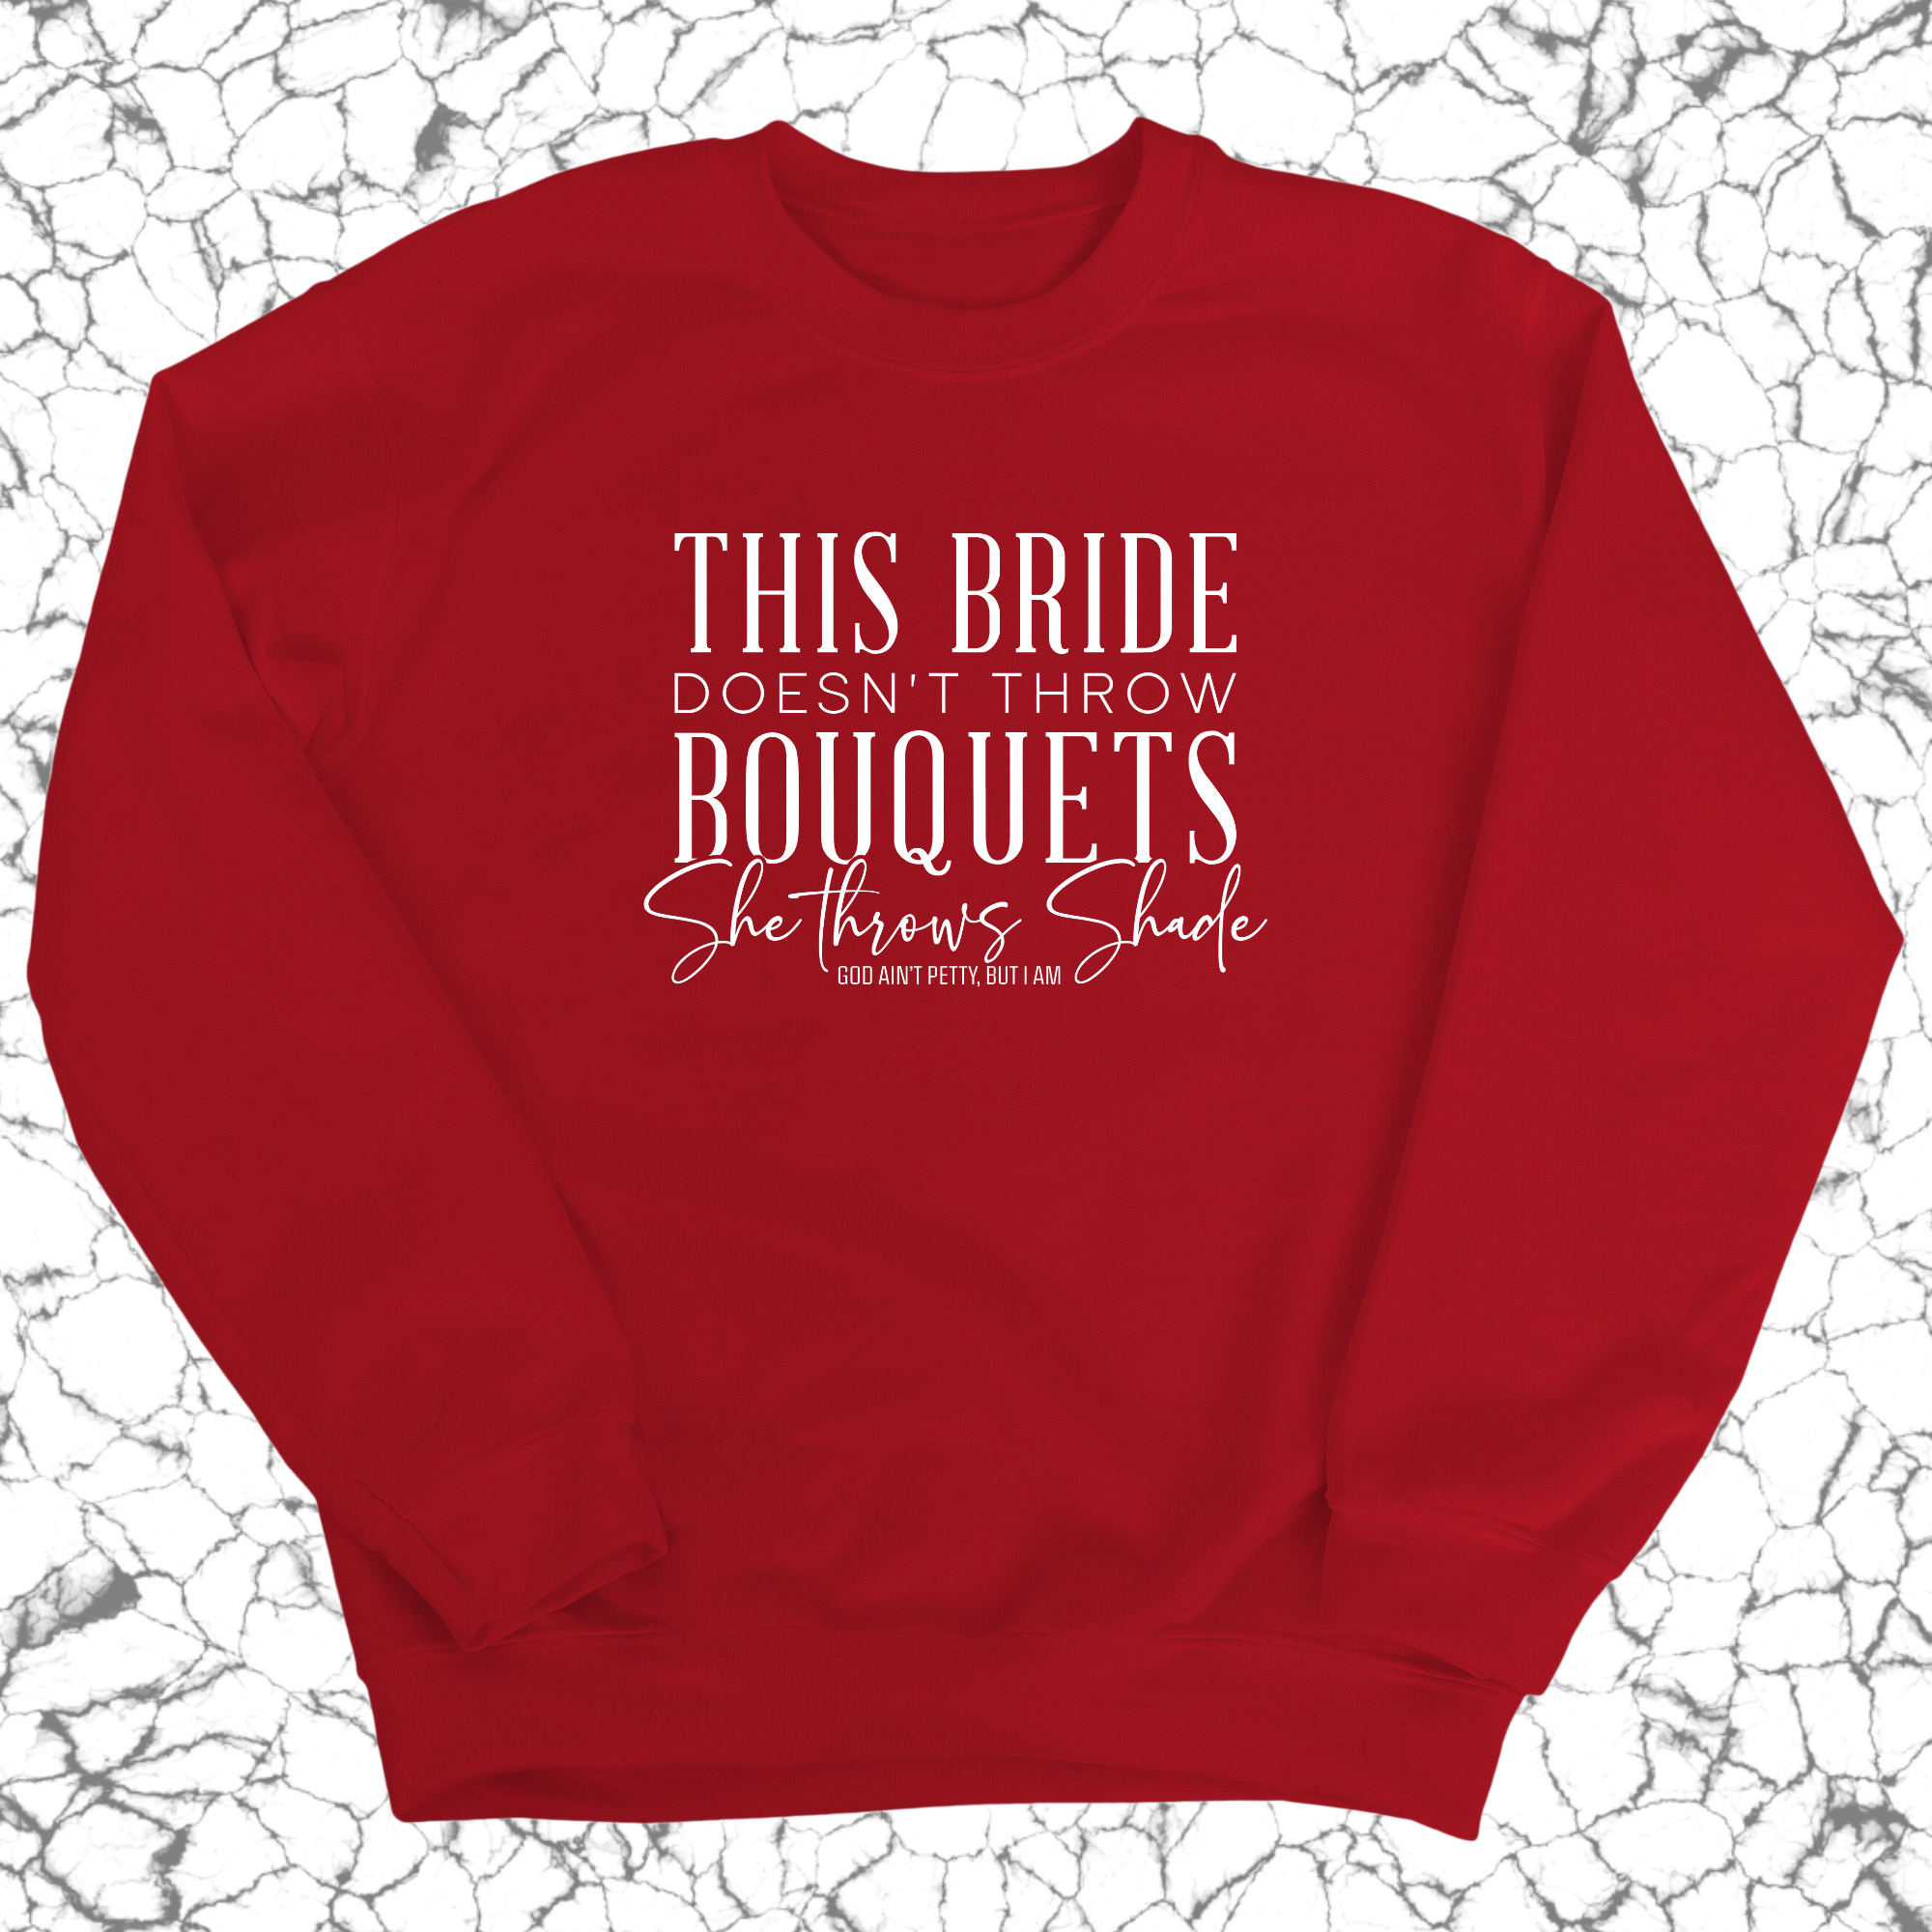 This bride doesn't throw bouquets, She throws shade sweatshirt Unisex Sweatshirt-Sweatshirt-The Original God Ain't Petty But I Am